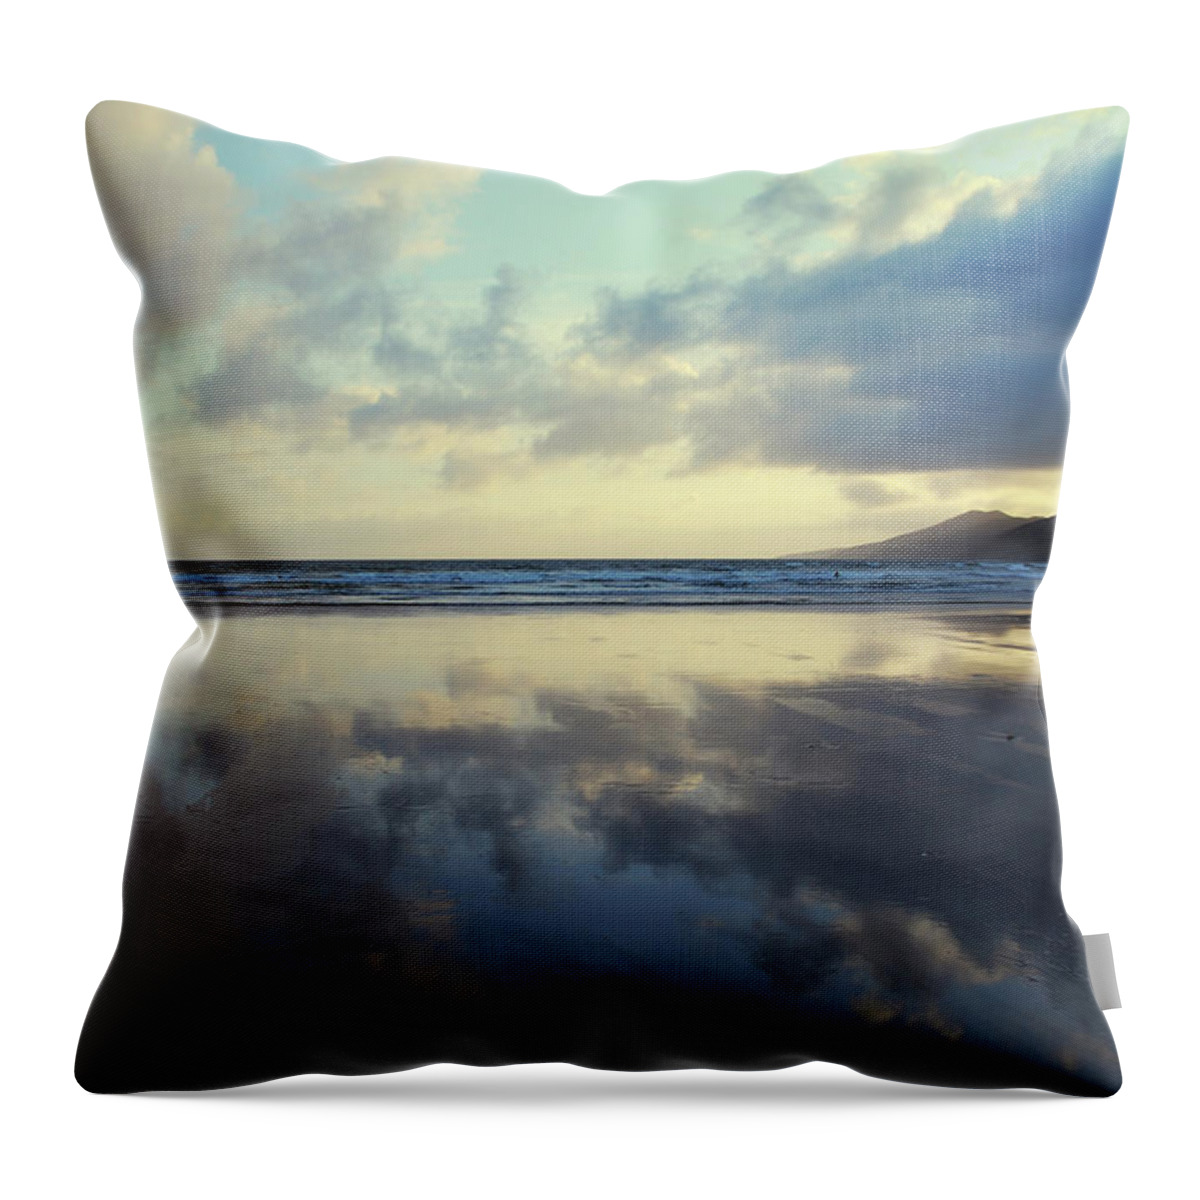 Tranquility Throw Pillow featuring the photograph Inch Beach In Ireland by Jean-philippe Tournut